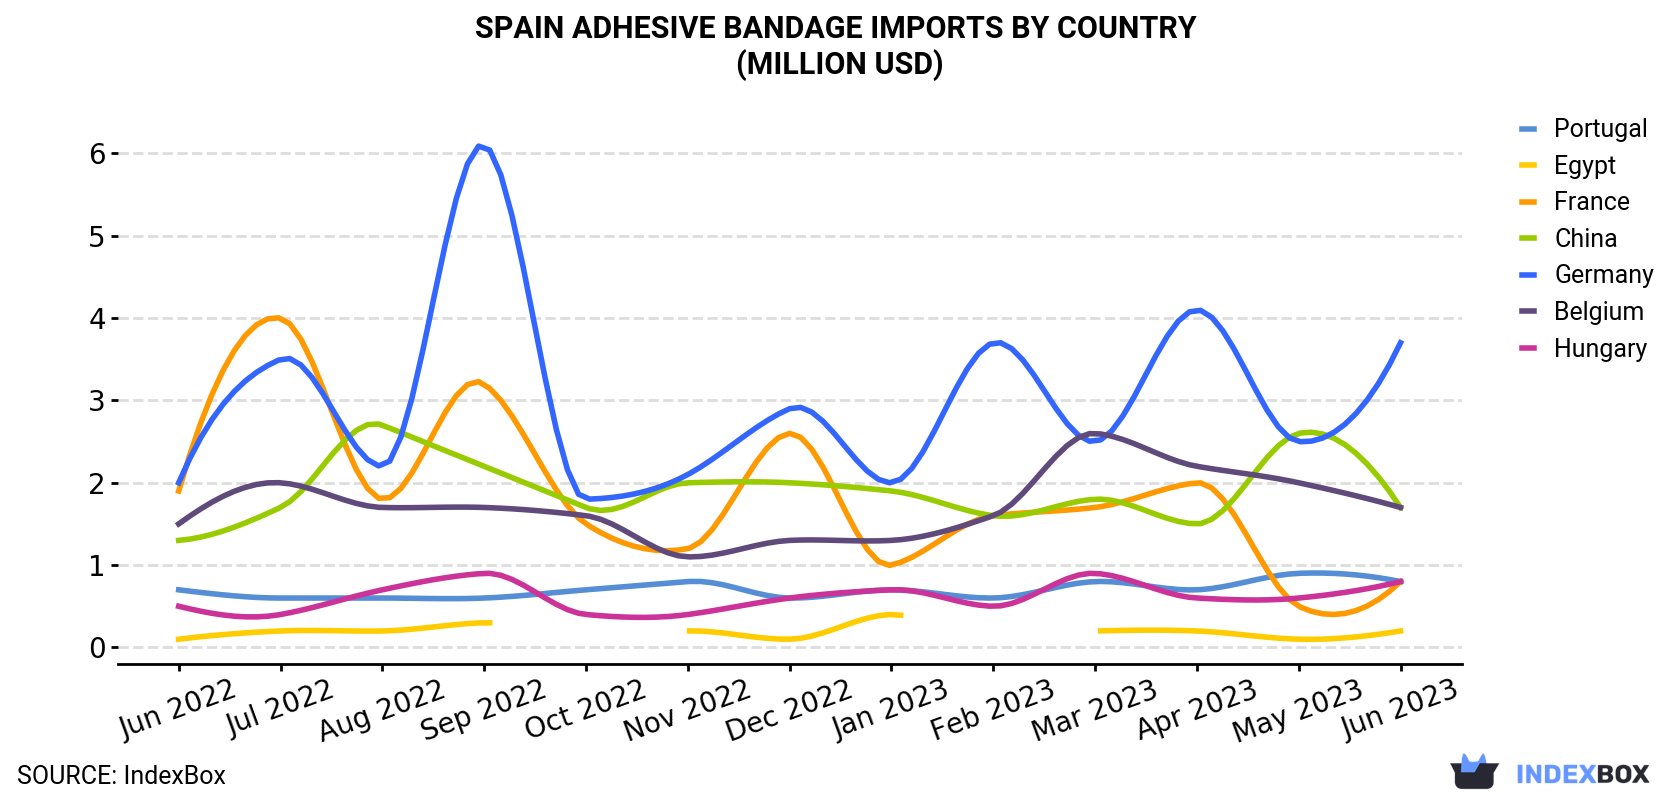 Spain Adhesive Bandage Imports By Country (Million USD)